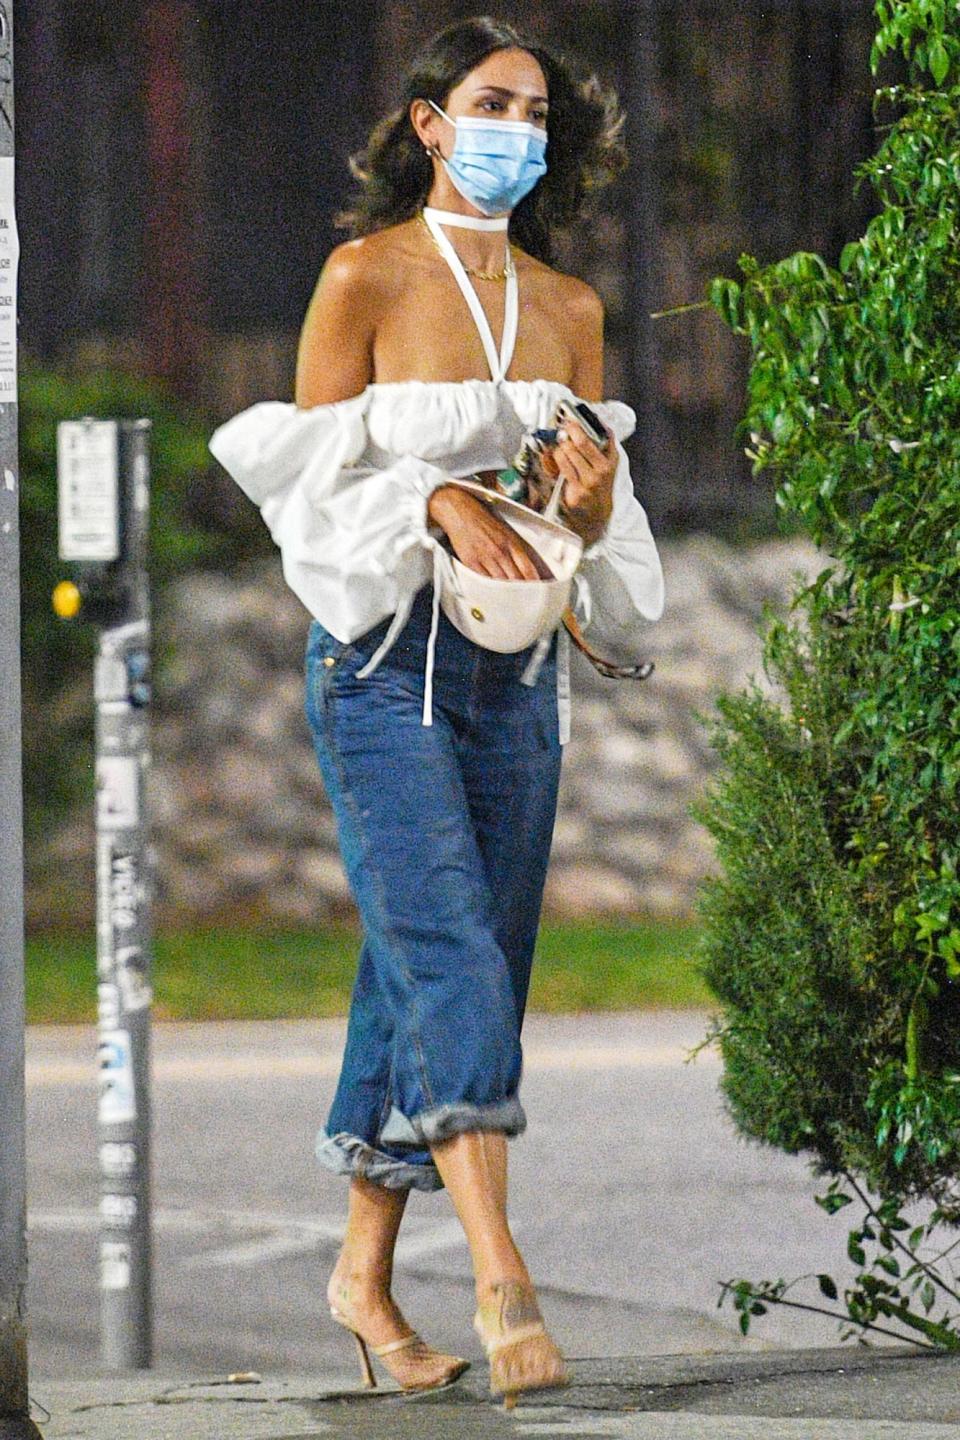 <p>Eiza Gonzales looks chic as she’s seen leaving pal Taika Waititi’s birthday party in a white blouse and cuffed blue jeans on Friday in Malibu. </p>